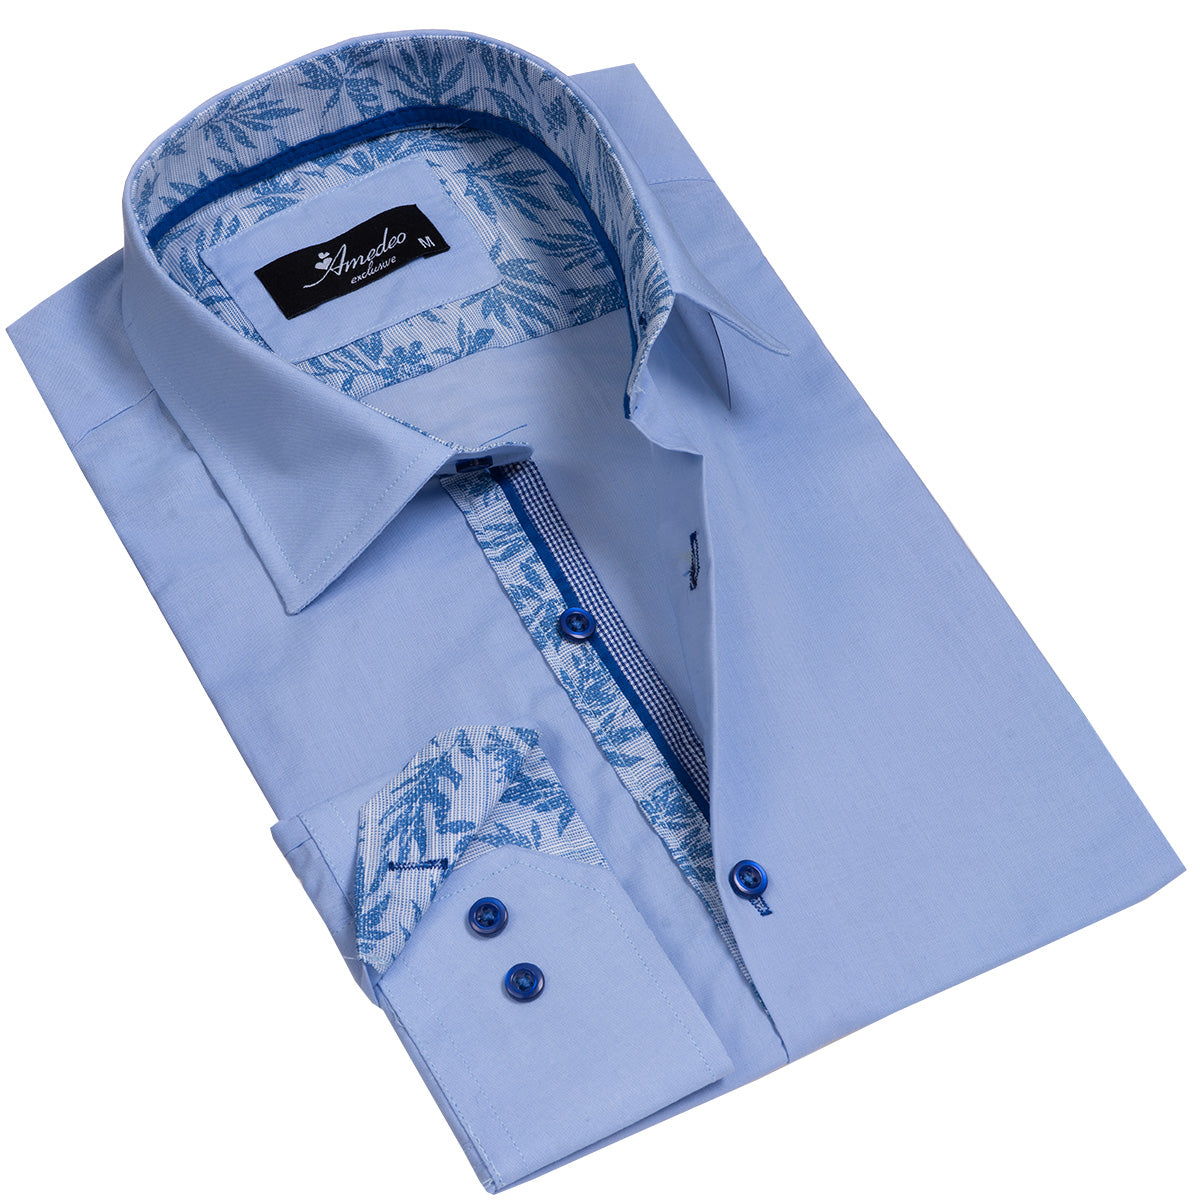 Light Blue Paisley Mens Slim Fit Designer Dress Shirt - Tailored Cotton Shirts For Work And Casual